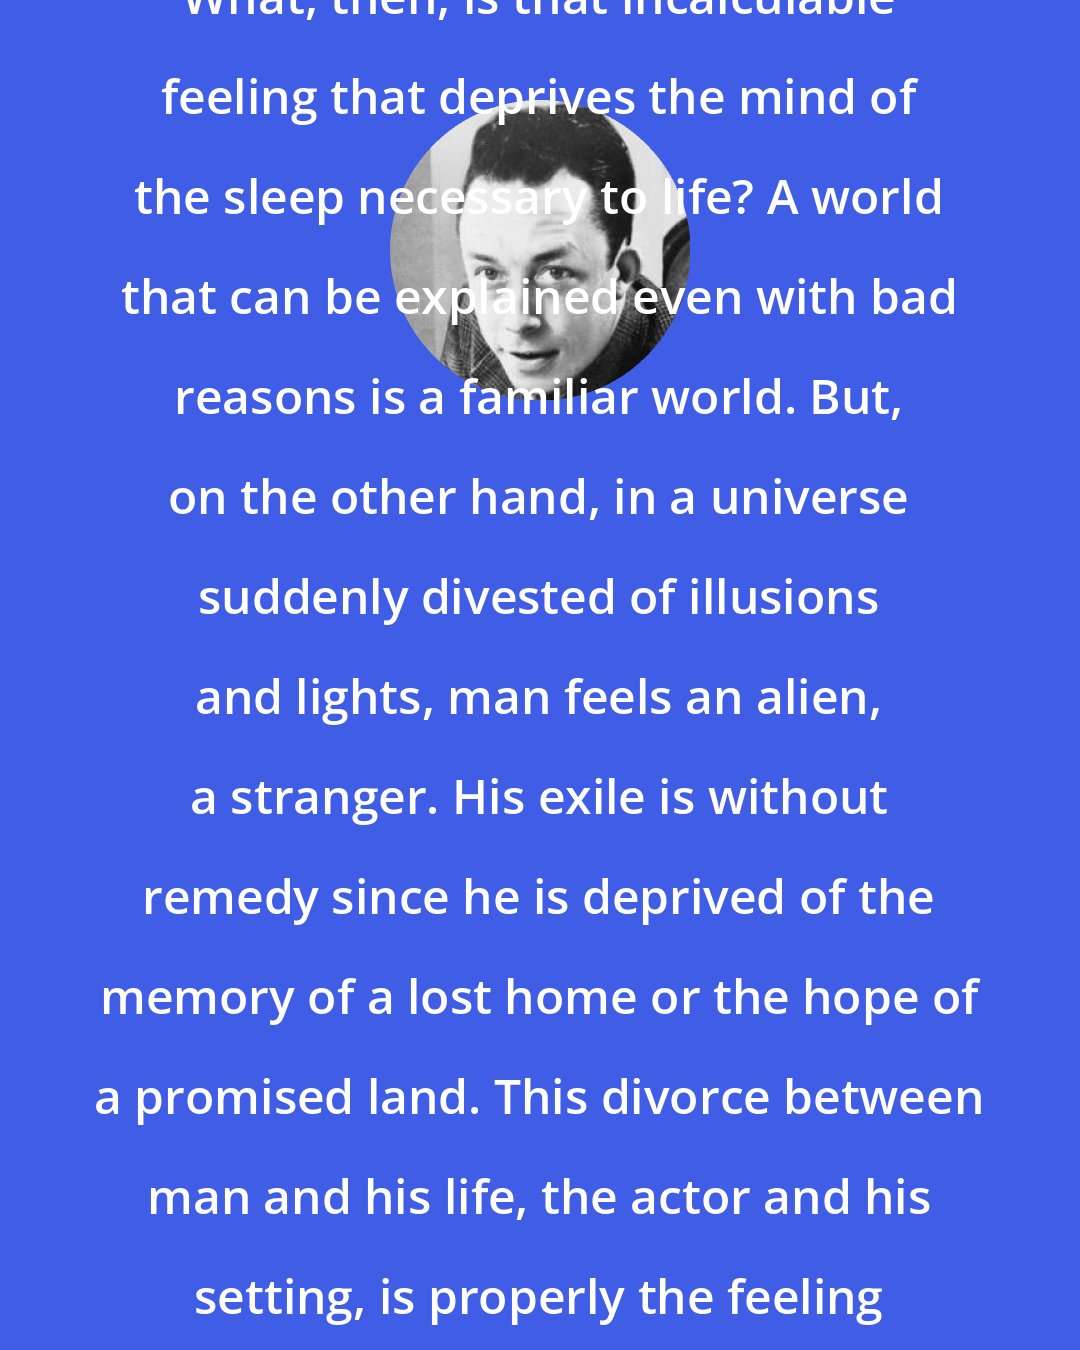 Albert Camus: What, then, is that incalculable feeling that deprives the mind of the sleep necessary to life? A world that can be explained even with bad reasons is a familiar world. But, on the other hand, in a universe suddenly divested of illusions and lights, man feels an alien, a stranger. His exile is without remedy since he is deprived of the memory of a lost home or the hope of a promised land. This divorce between man and his life, the actor and his setting, is properly the feeling of absurdity.